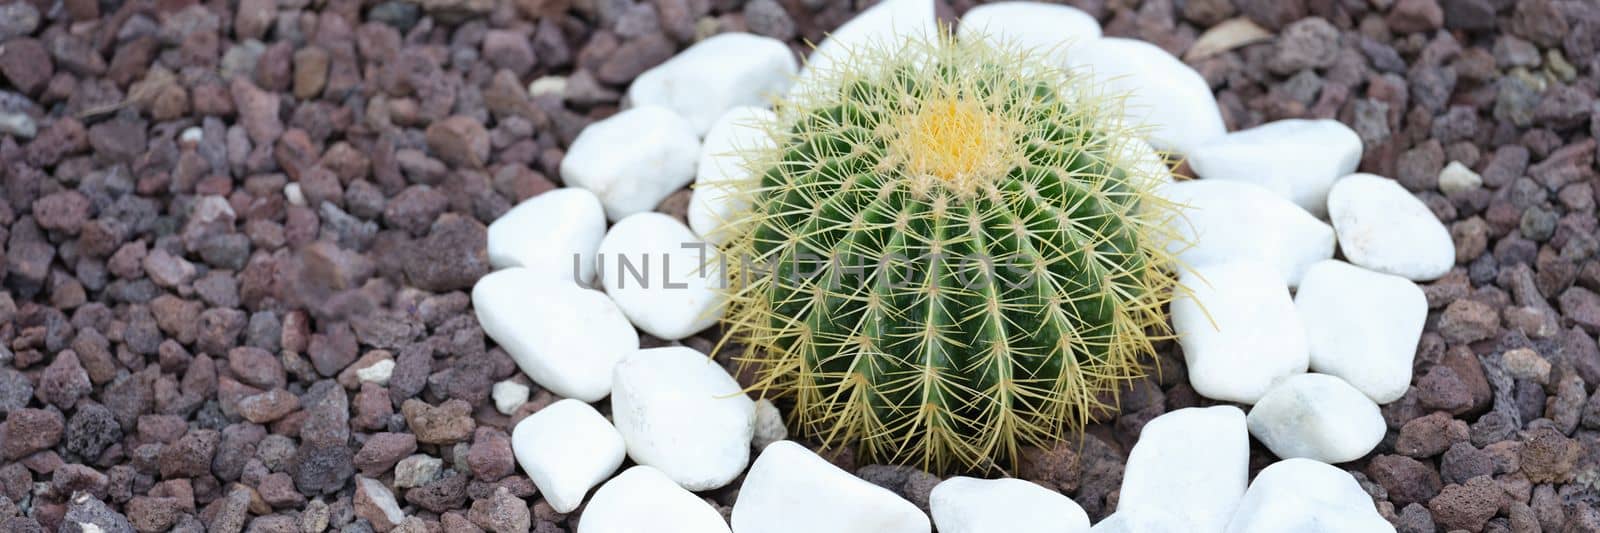 Decorative cactus in the garden between white stones in flower bed. Landscape designer from cacti concept